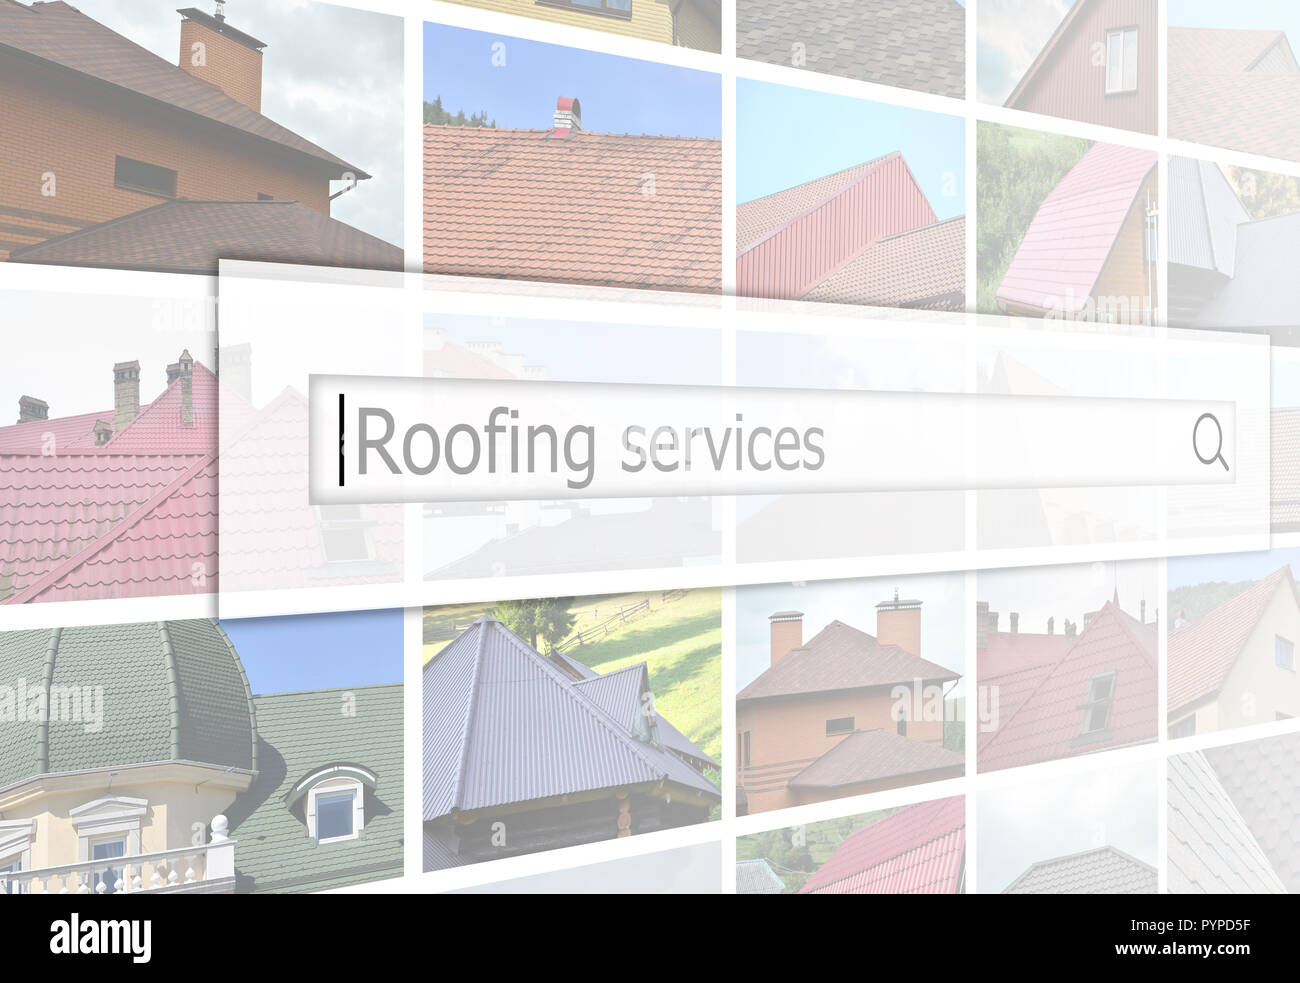 duggan construction and roofing<br>Roofing